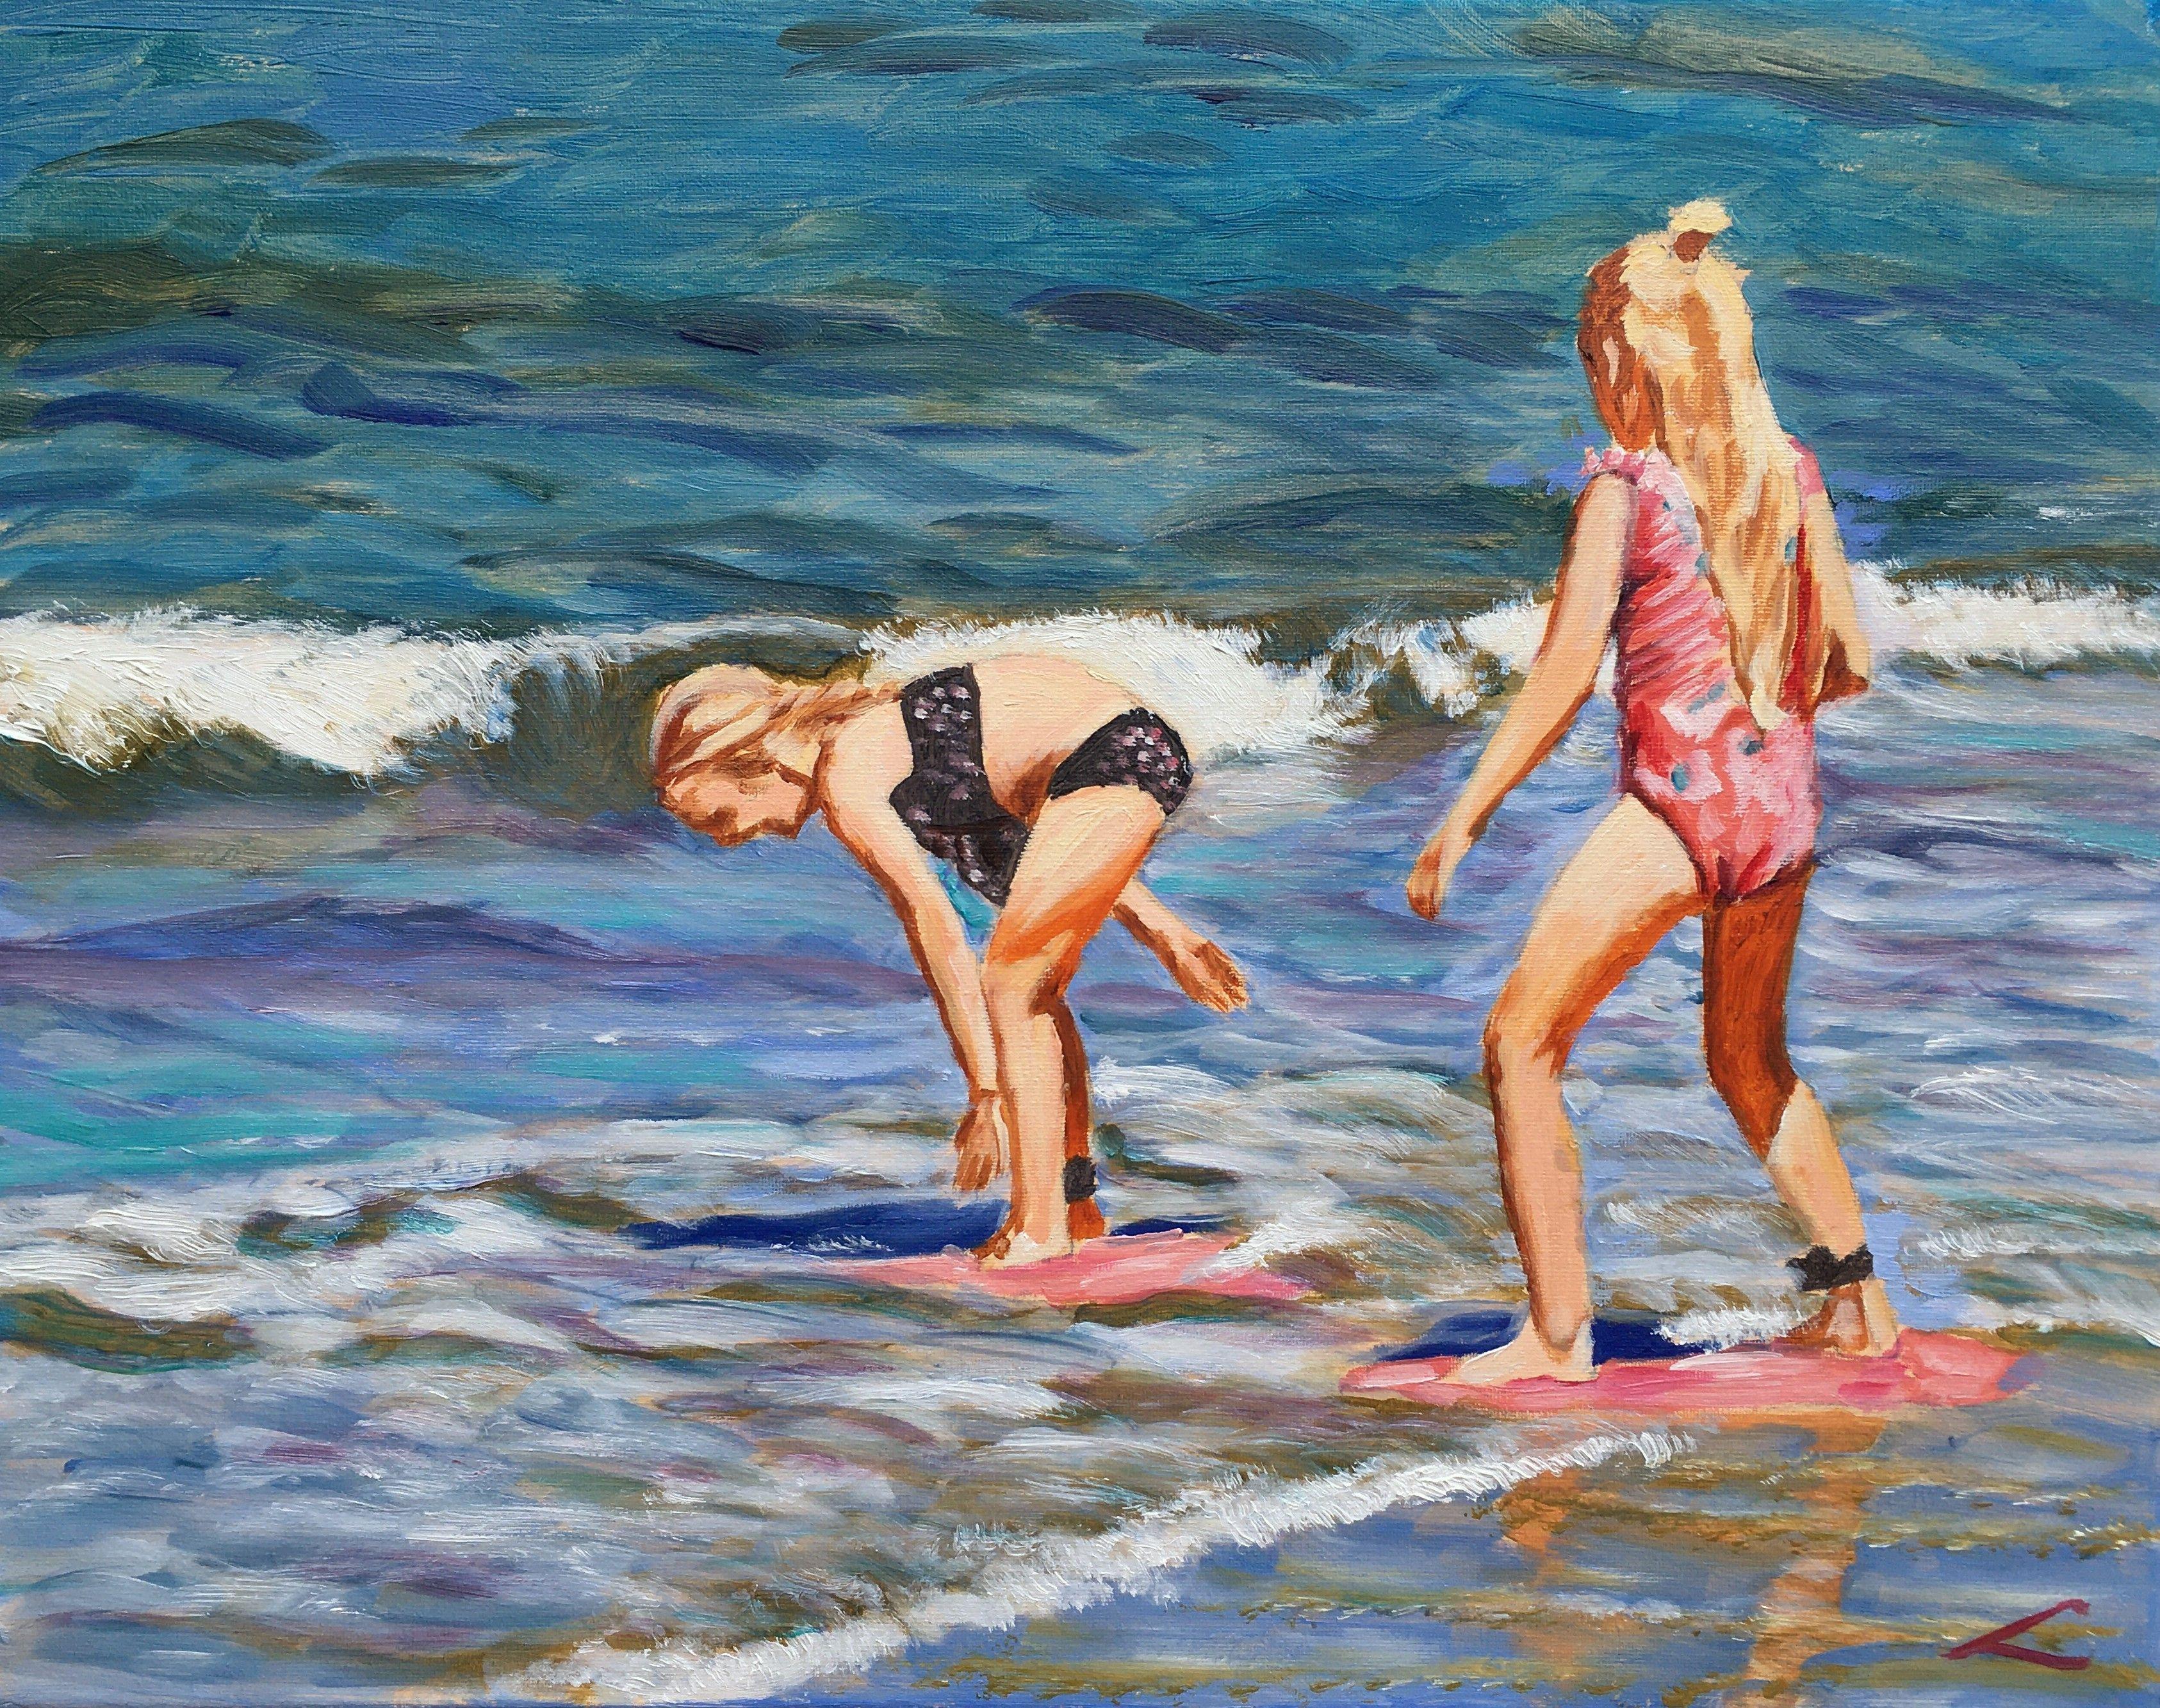 Two girls at the sea. Alla prima oil painting with few final touches when dry. Beautiful weather with a big shining sun. And I'm standing there taking it all in. The many spectacular sights jump at my eyes. Kids and dogs run around and splash each